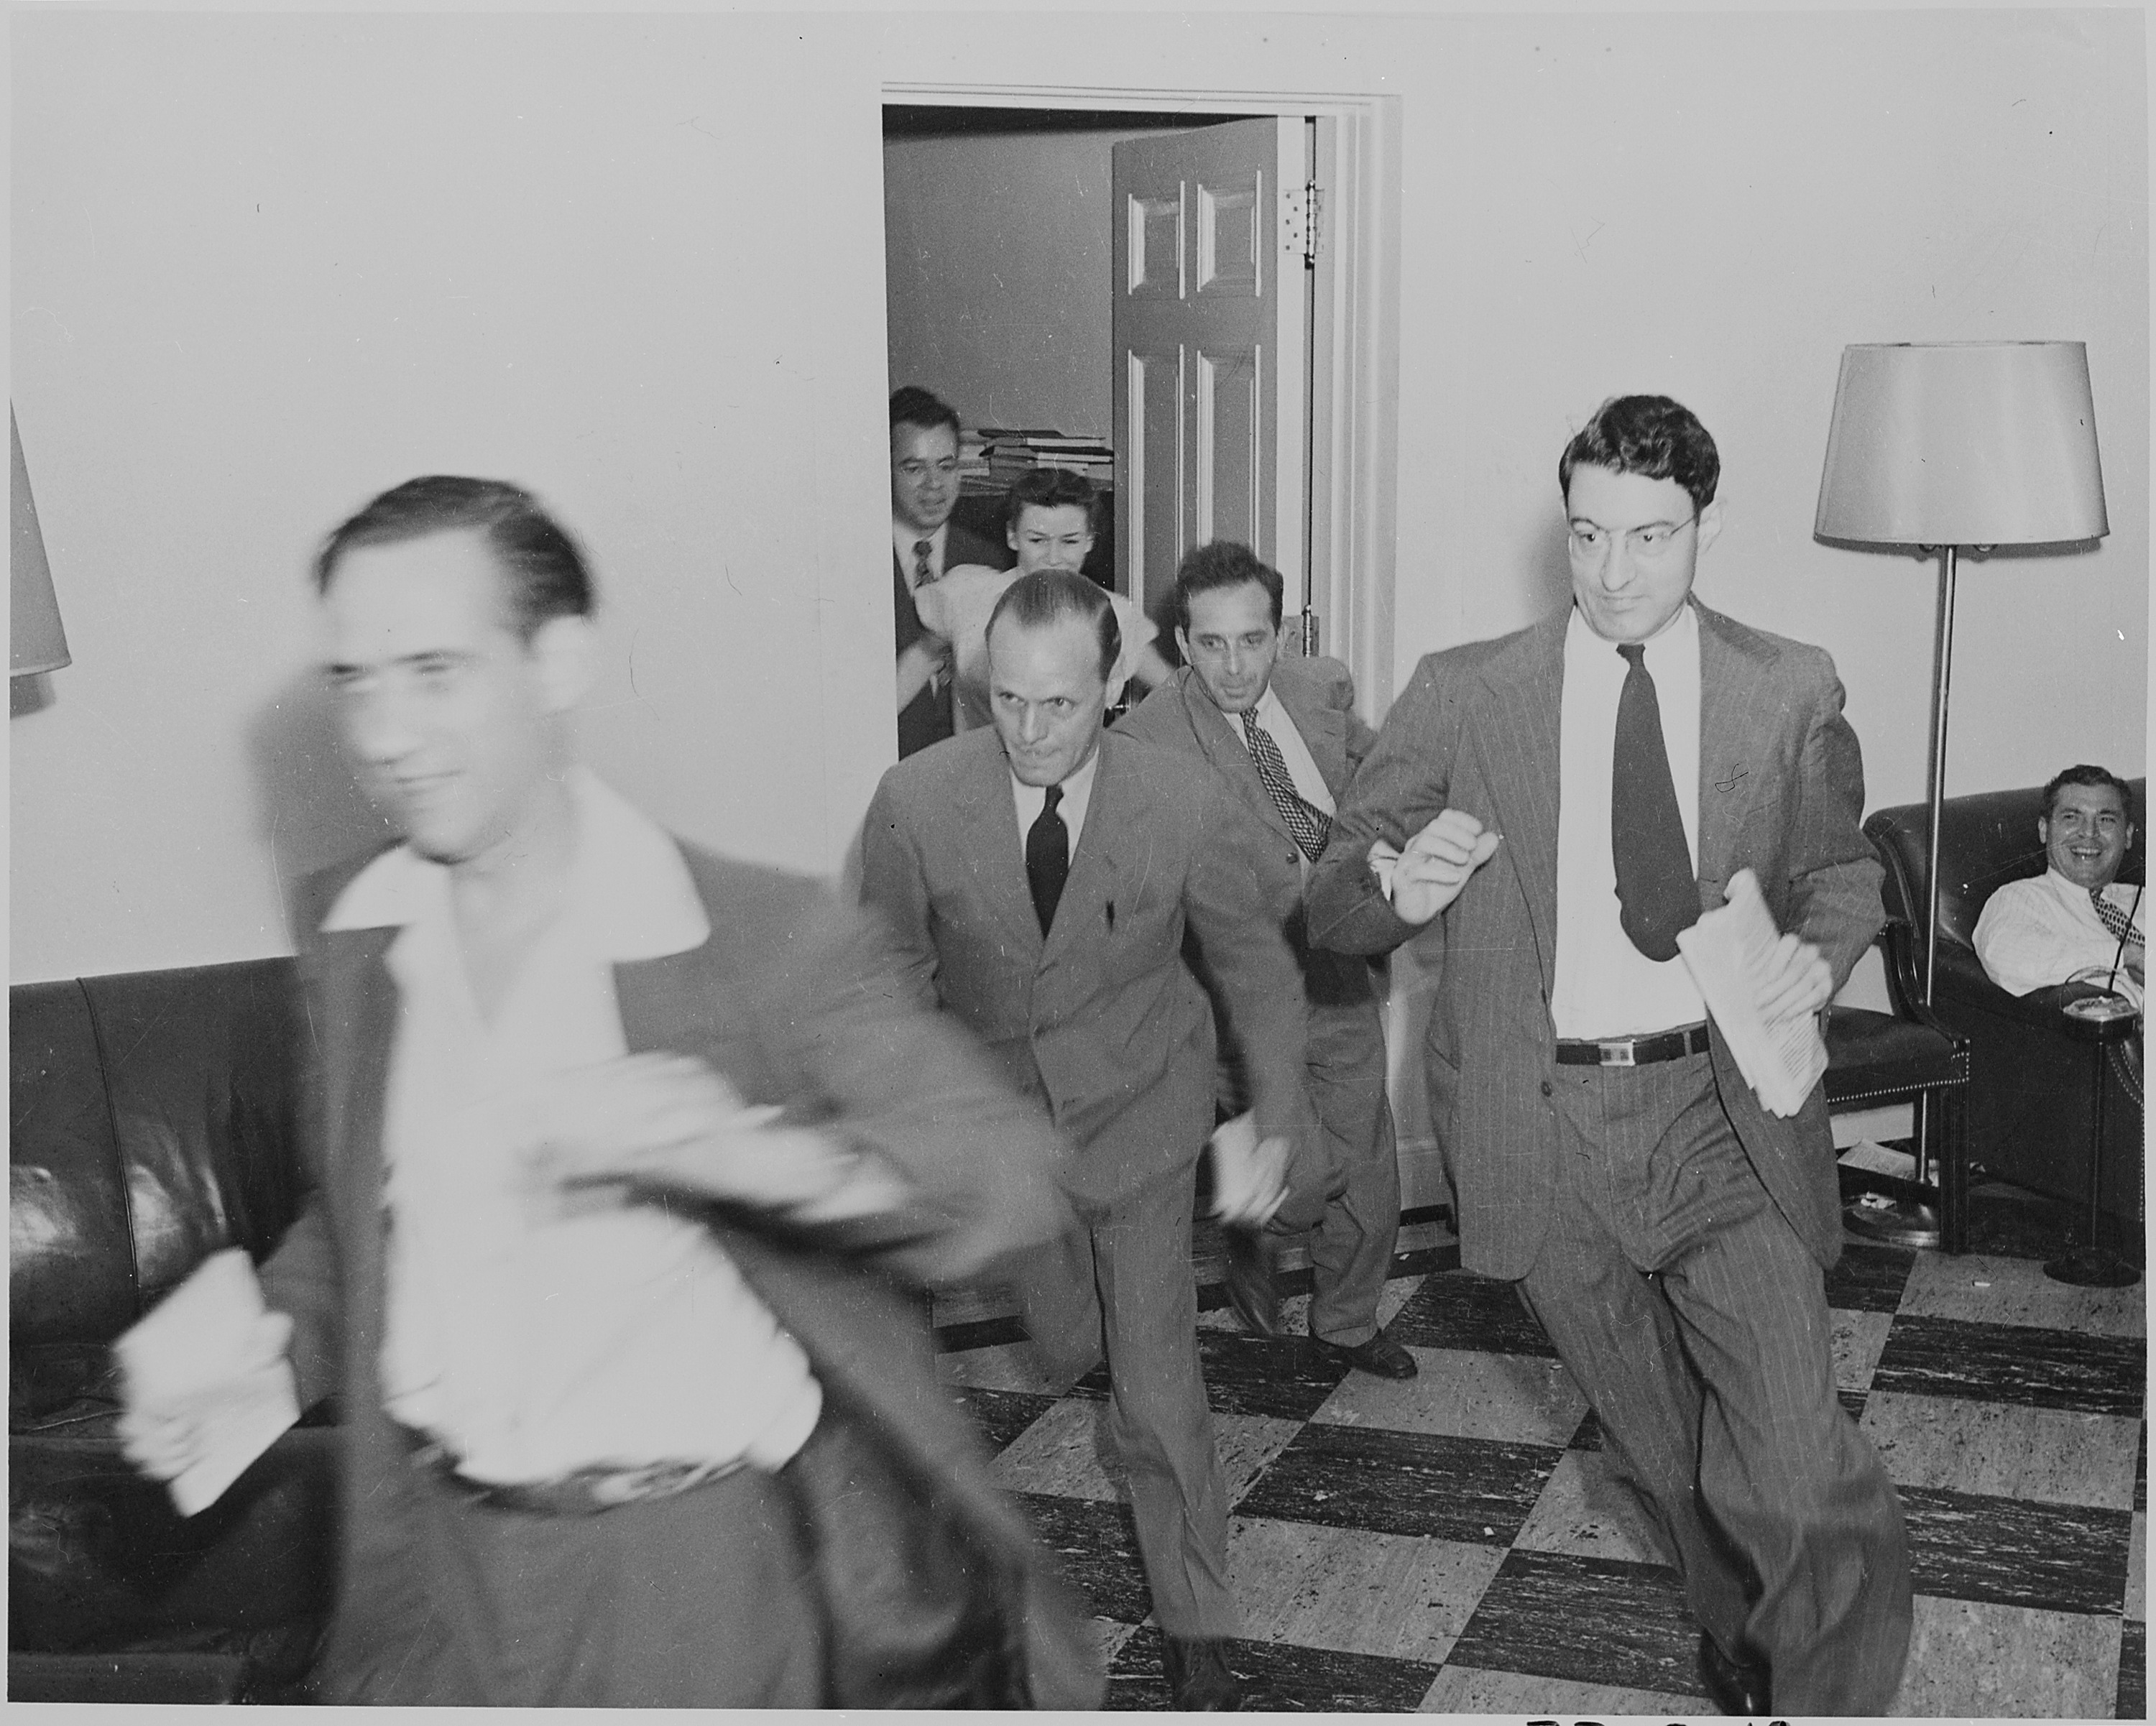 Photograph of reporters rushing excitedly through the White House with news of the Japanese surrender. - NARA - 199172